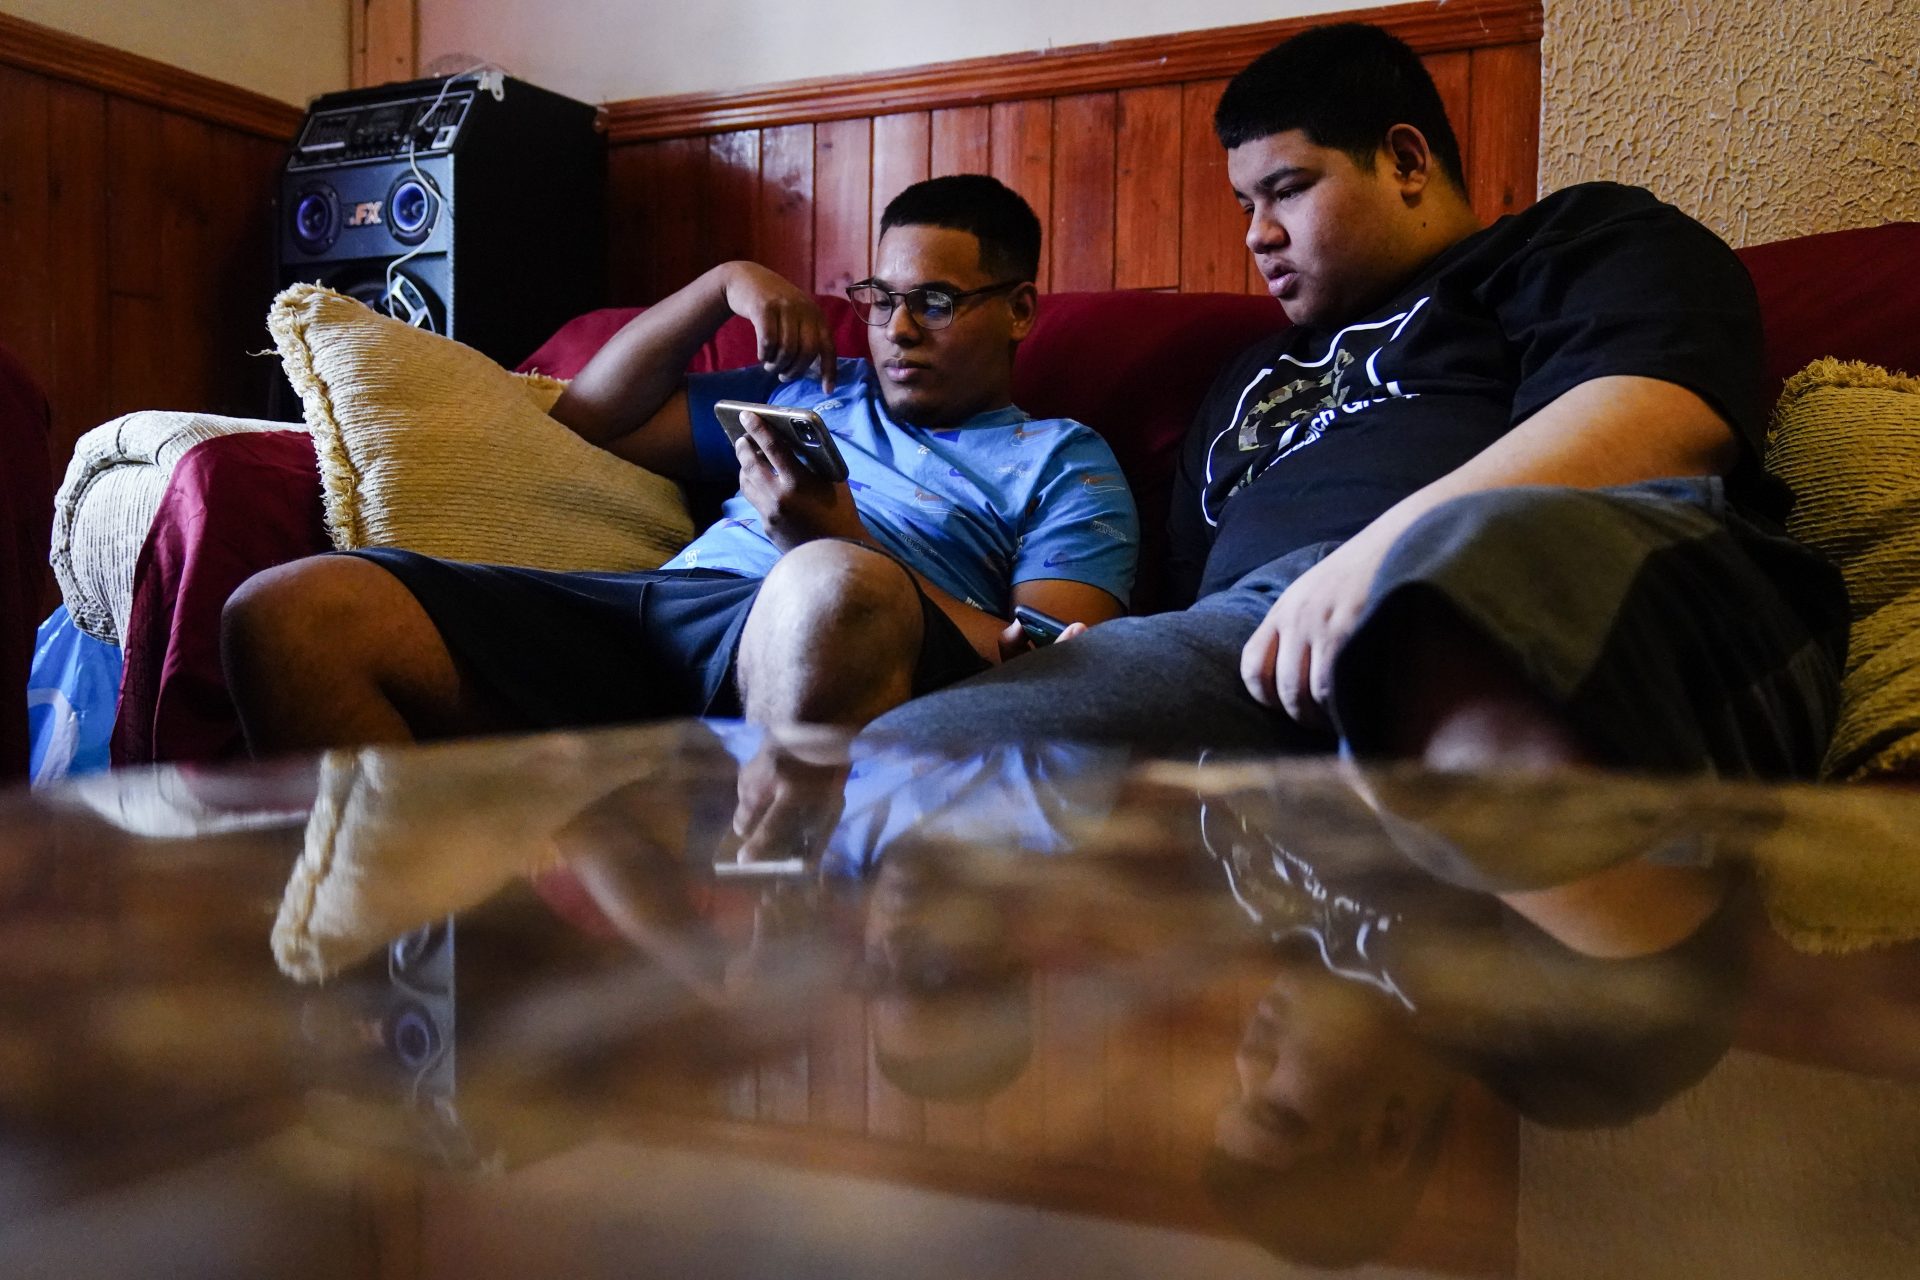 Mino Zuniga Gonzales, 19, left, and his brother Erick Zuniga Gonzales, 17, look at a smart phone in the Kensington section of Philadelphia, Sunday, May 16, 2021.